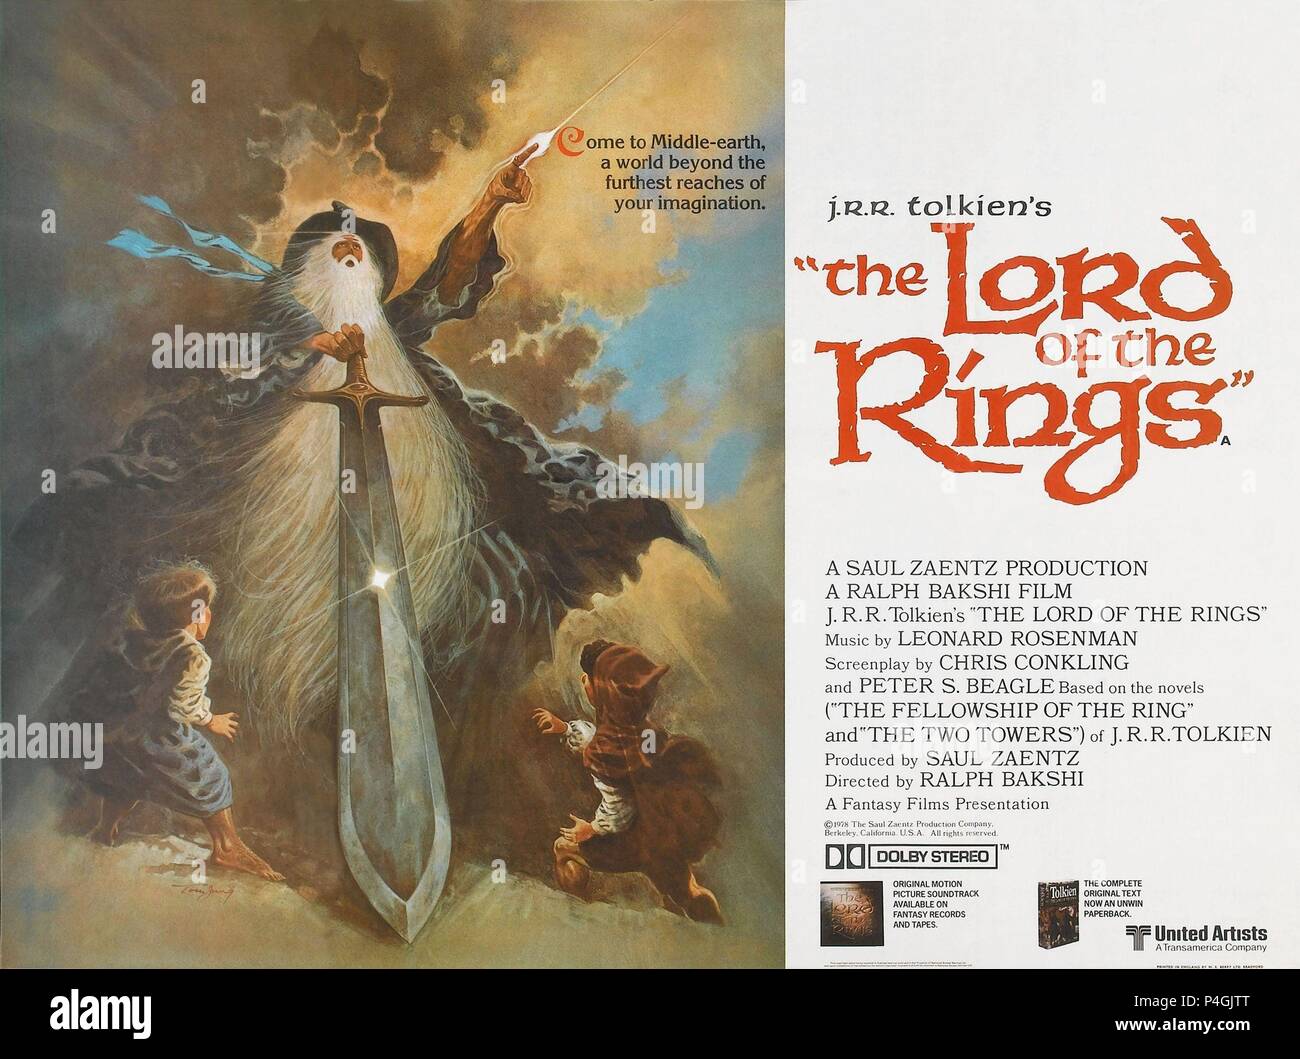 Original Film Title: THE LORD OF THE RINGS. English Title: THE LORD OF THE  RINGS. Film Director: RALPH BAKSHI. Year: 1978. Credit: UNITED ARTISTS /  Album Stock Photo - Alamy